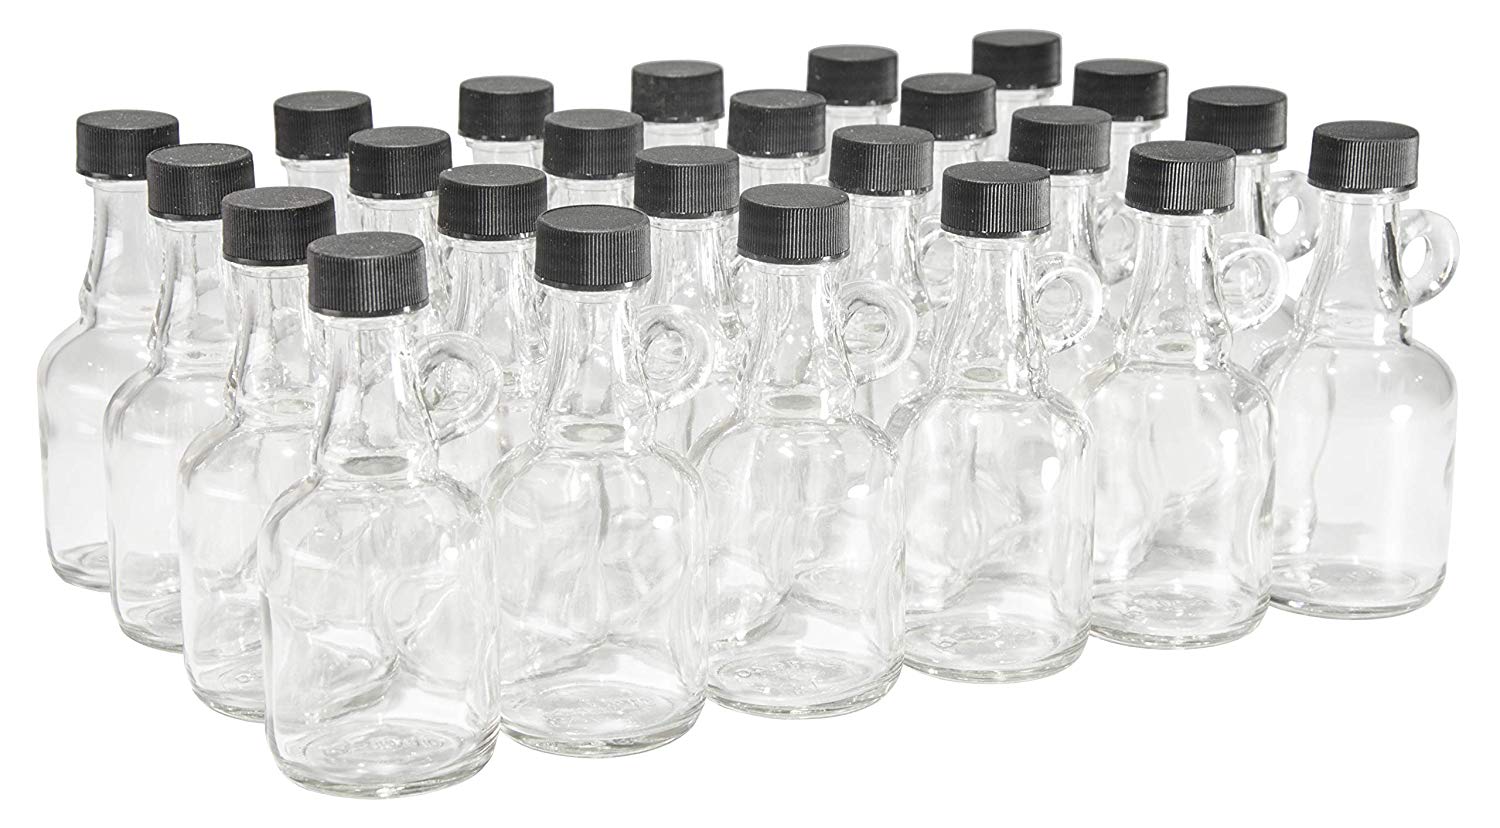 North Mountain Supply - SJ-1.7-BP 1.7 Ounce Glass Syrup Bottles with Loop Handle & Black Plastic Lids - Case of 24